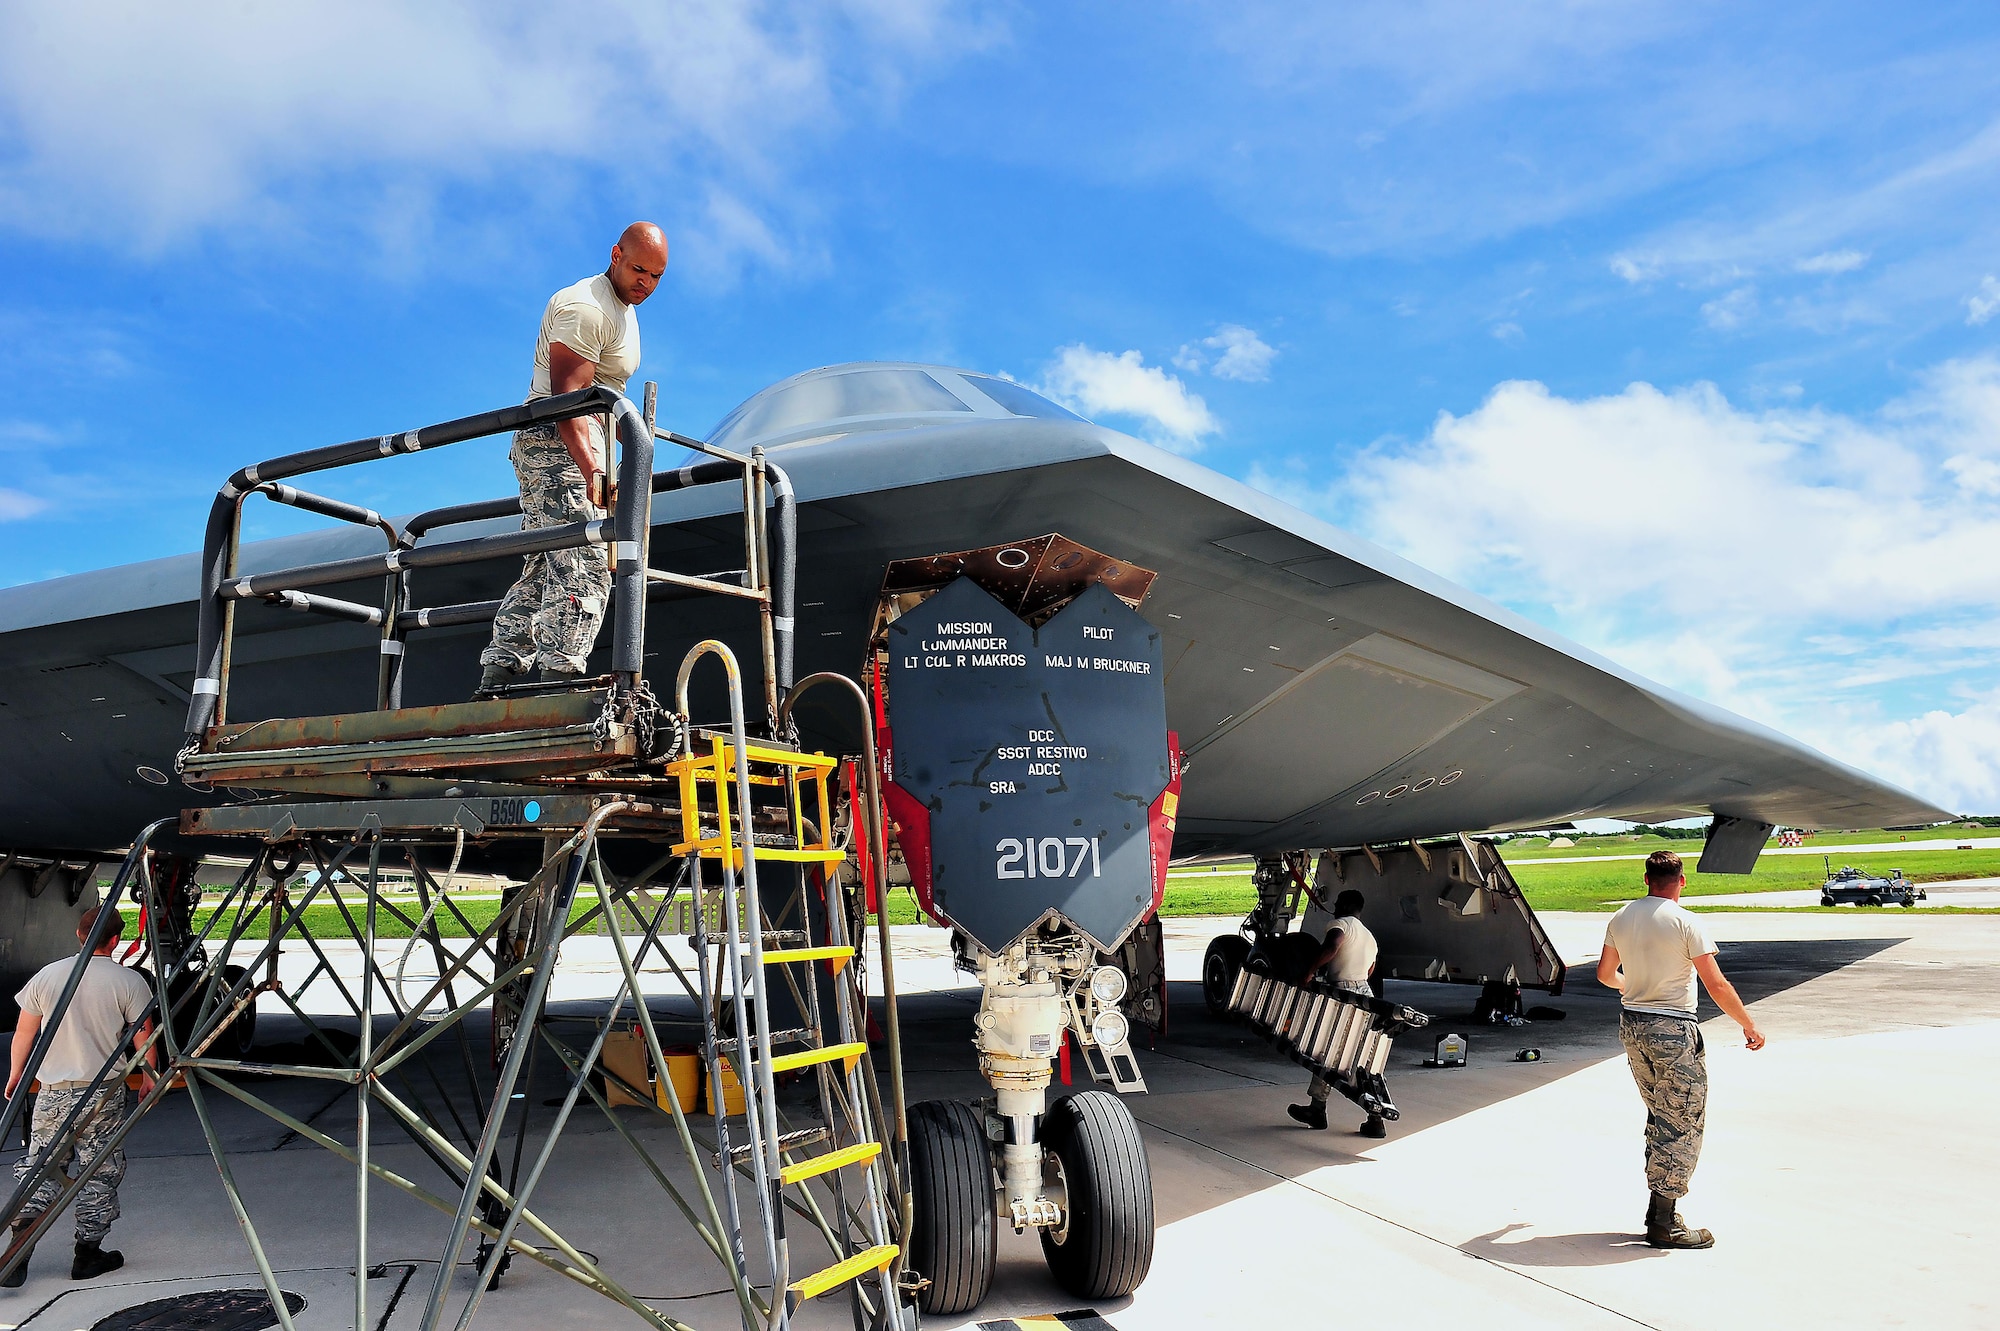 Members of the 509th and 131st Maintenance Group deployed from Whiteman Air Force Base, Mo., conduct pre-flight checks Aug. 10, 2016, at Andersen Air Force Base, Guam. Approximately 200 Airmen and three B-2 Spirits deployed here to demonstrate the ability of the U.S. bomber force providing a flexible and vigilant long range global-strike capability and a commitment to supporting global security. (U.S. Air Force photo by Senior Airman Jovan Banks)